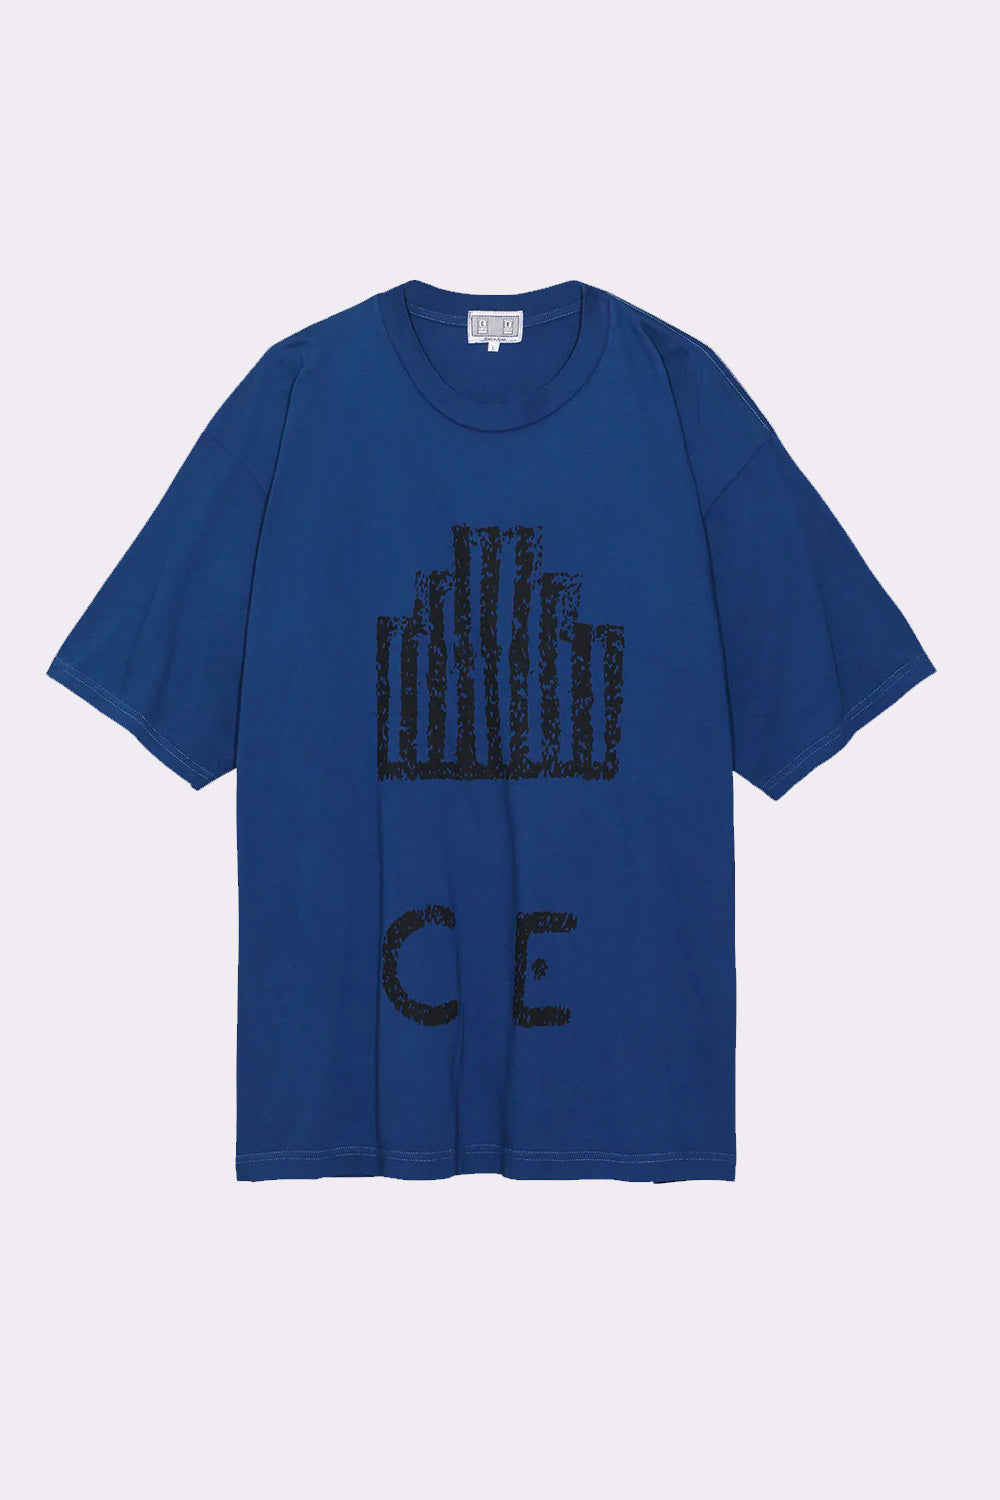 The CAV EMPT - OVERDYE STAMPED CE BIG T NAVY available online with global shipping, and in PAM Stores Melbourne and Sydney.